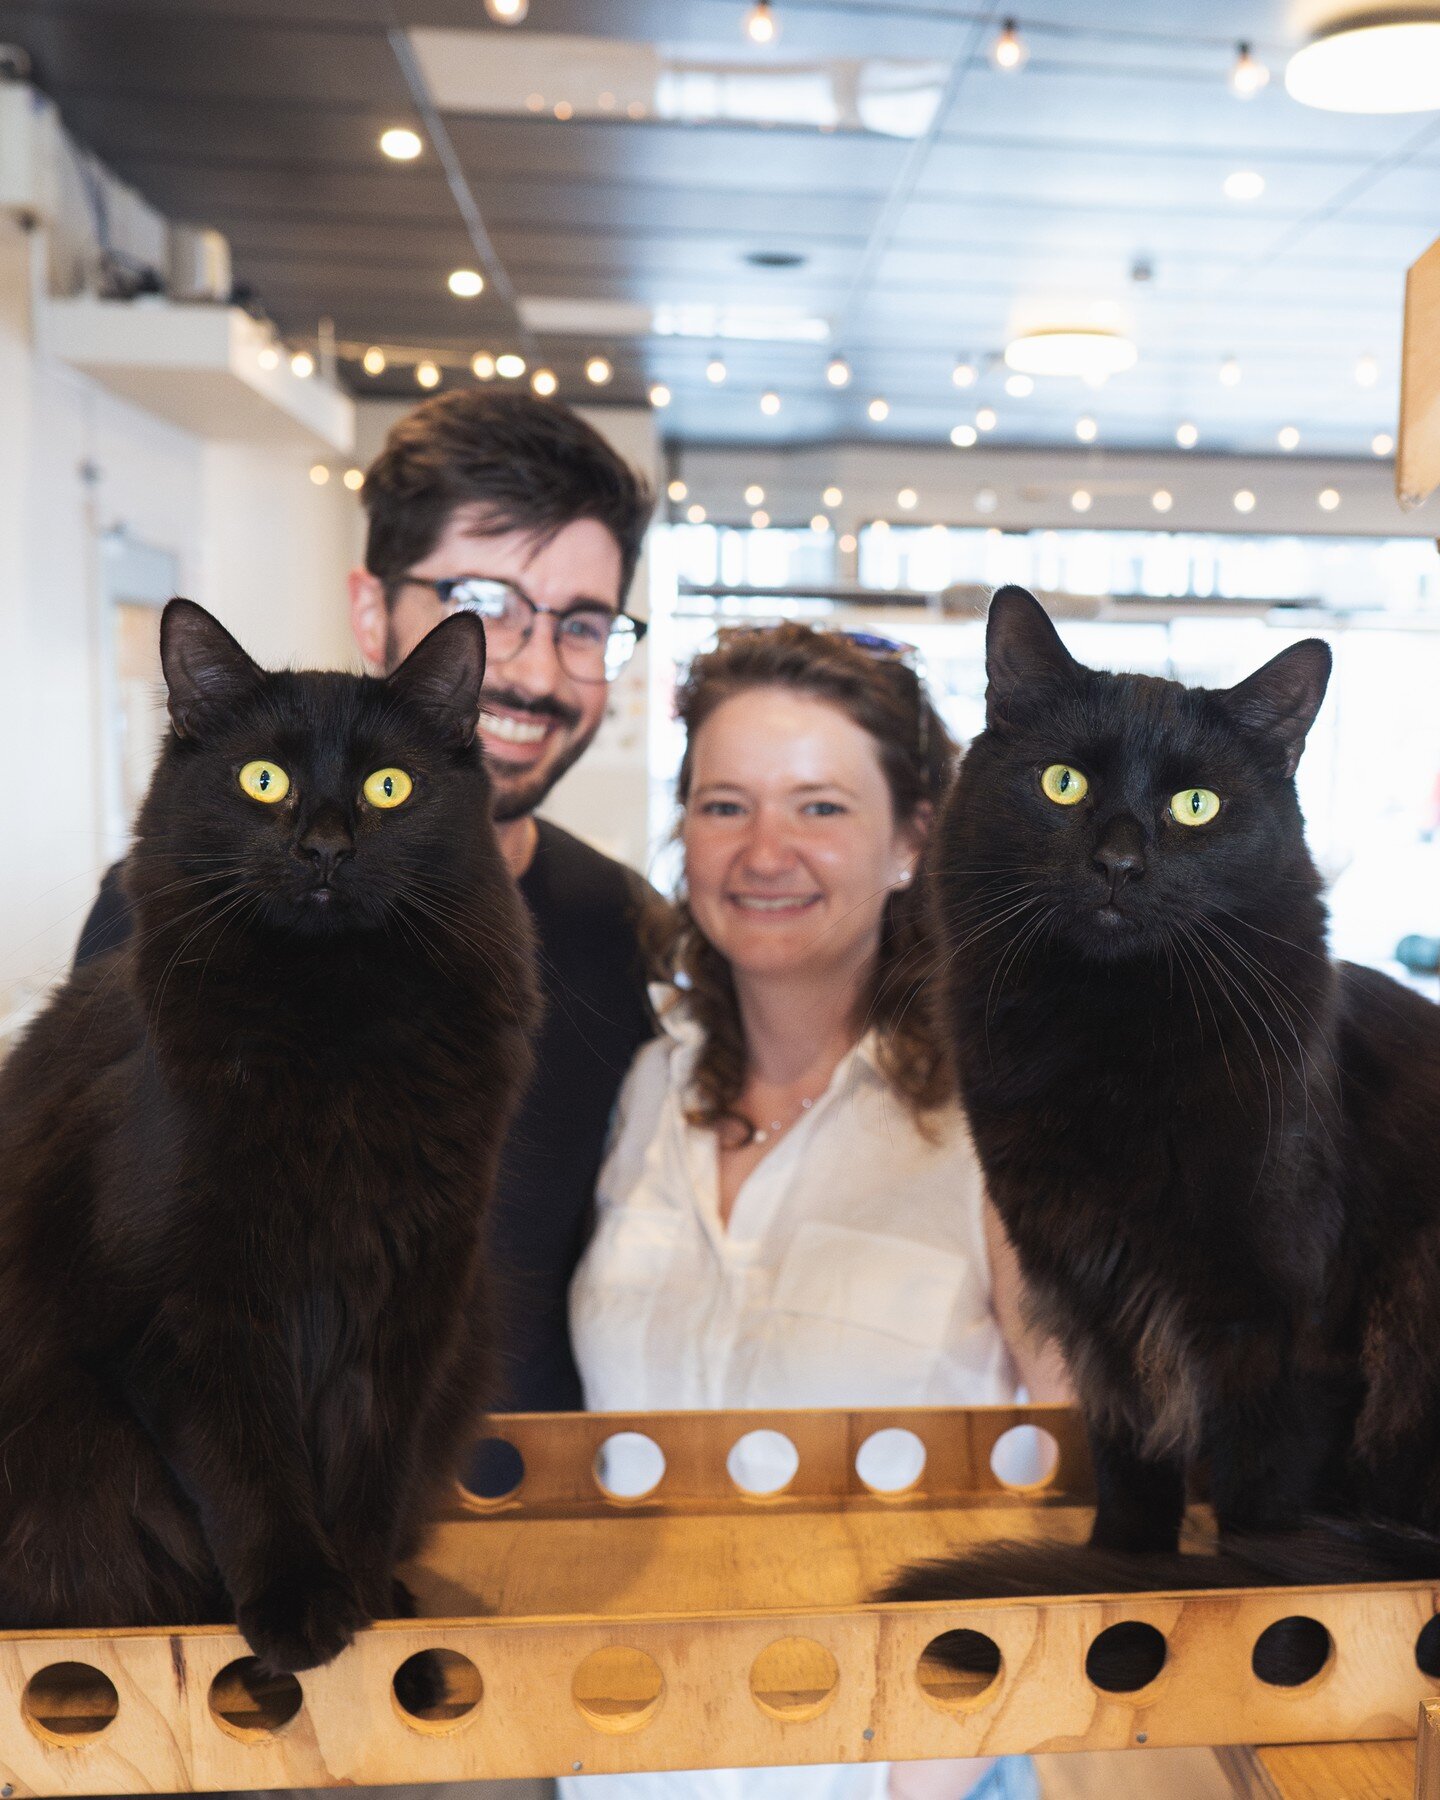 Cosmo and Wanda went to their new home together a couple of weeks ago 🐈&zwj;⬛❤️🐈&zwj;⬛

These two have been an esteemed duo at the cafe over the last several months and we miss them already!

Cosmo would most often be found lounging about on the ta